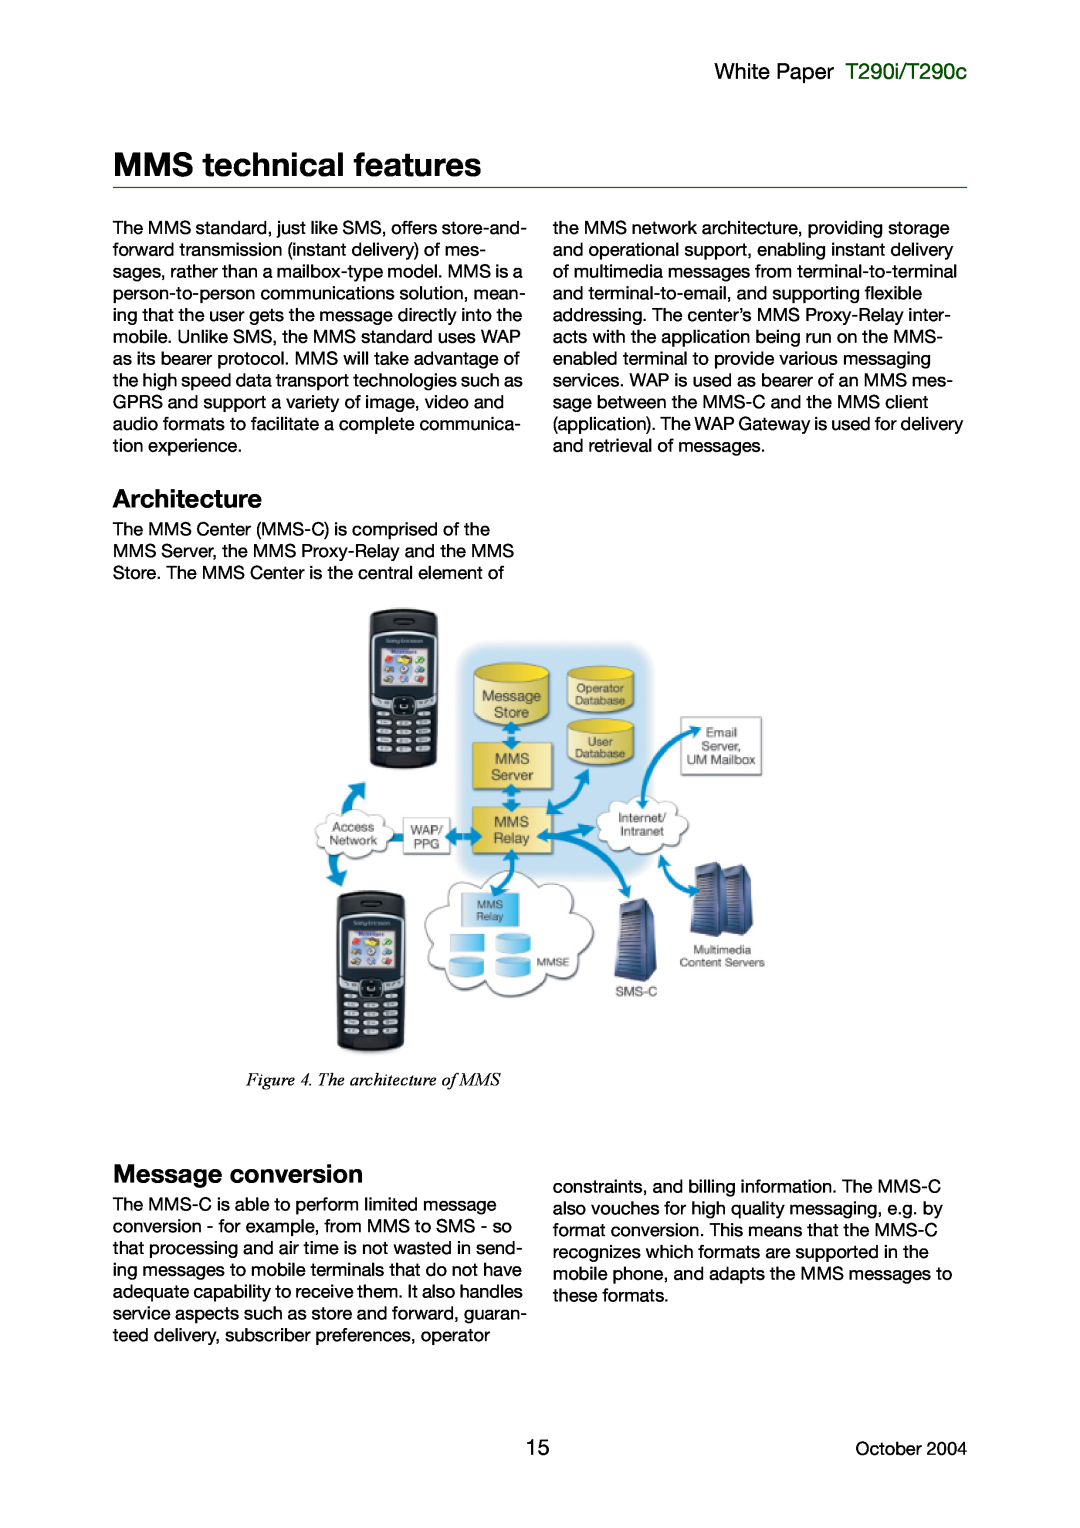 Sony Ericsson manual MMS technical features, Architecture, Message conversion, White Paper T290i/T290c 